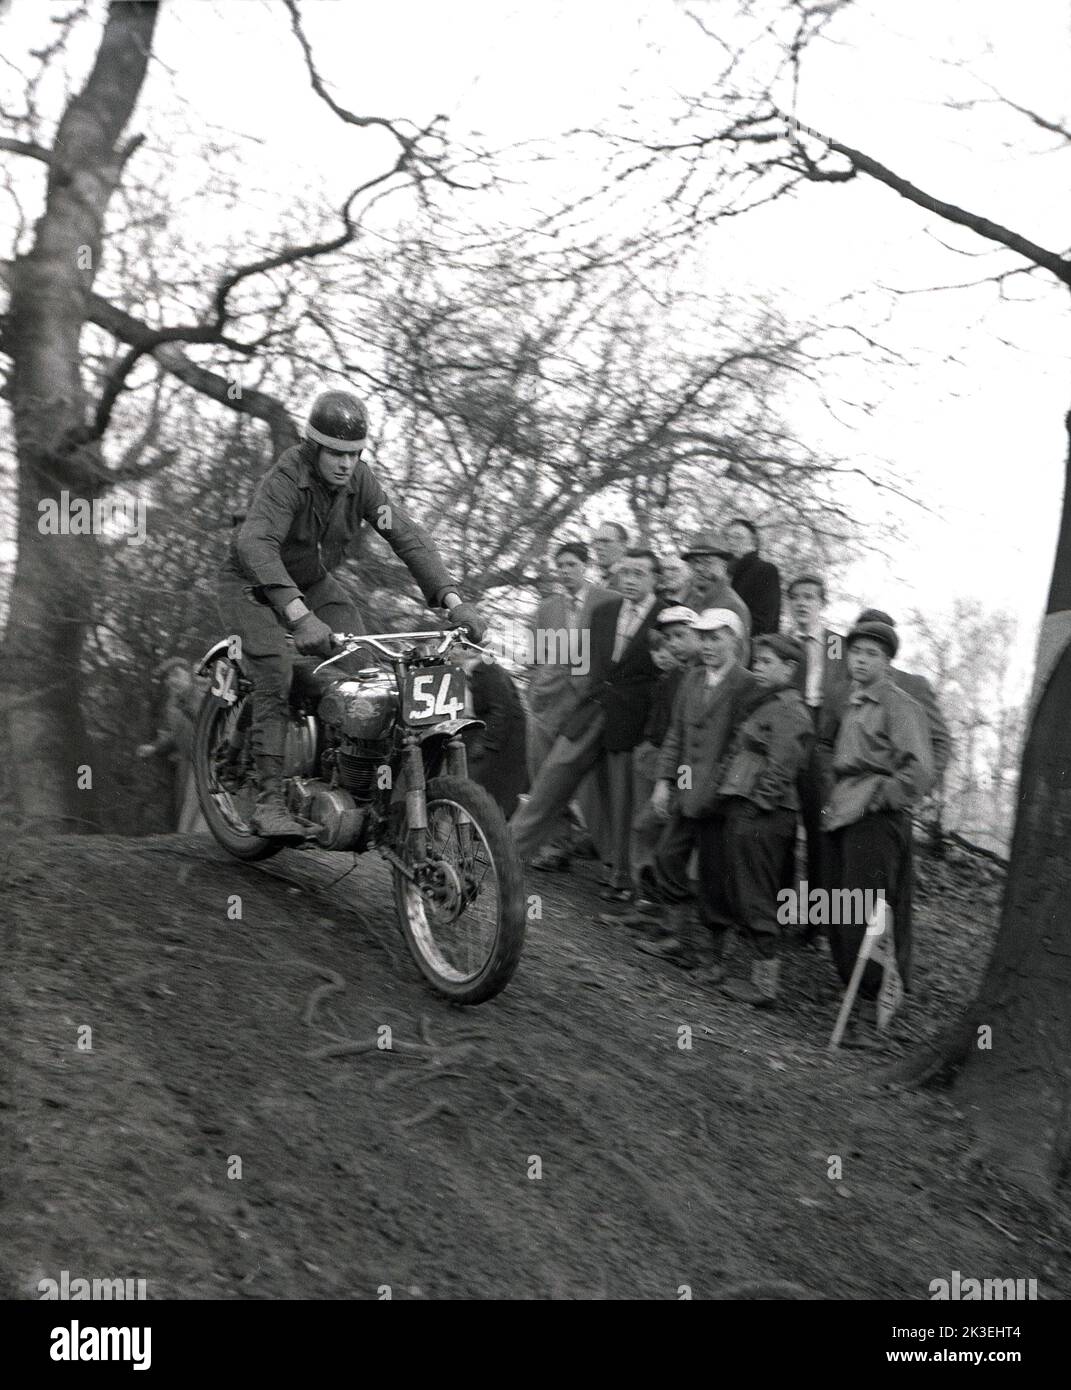 1954, historical, outside on steep rough terrain in a forest, spectators watching a competitor riding a motorcycle of the era, in a scramble or trial race at Seacroft, Leeds, England, UK, organised by the West Leeds Motor Club. Stock Photo